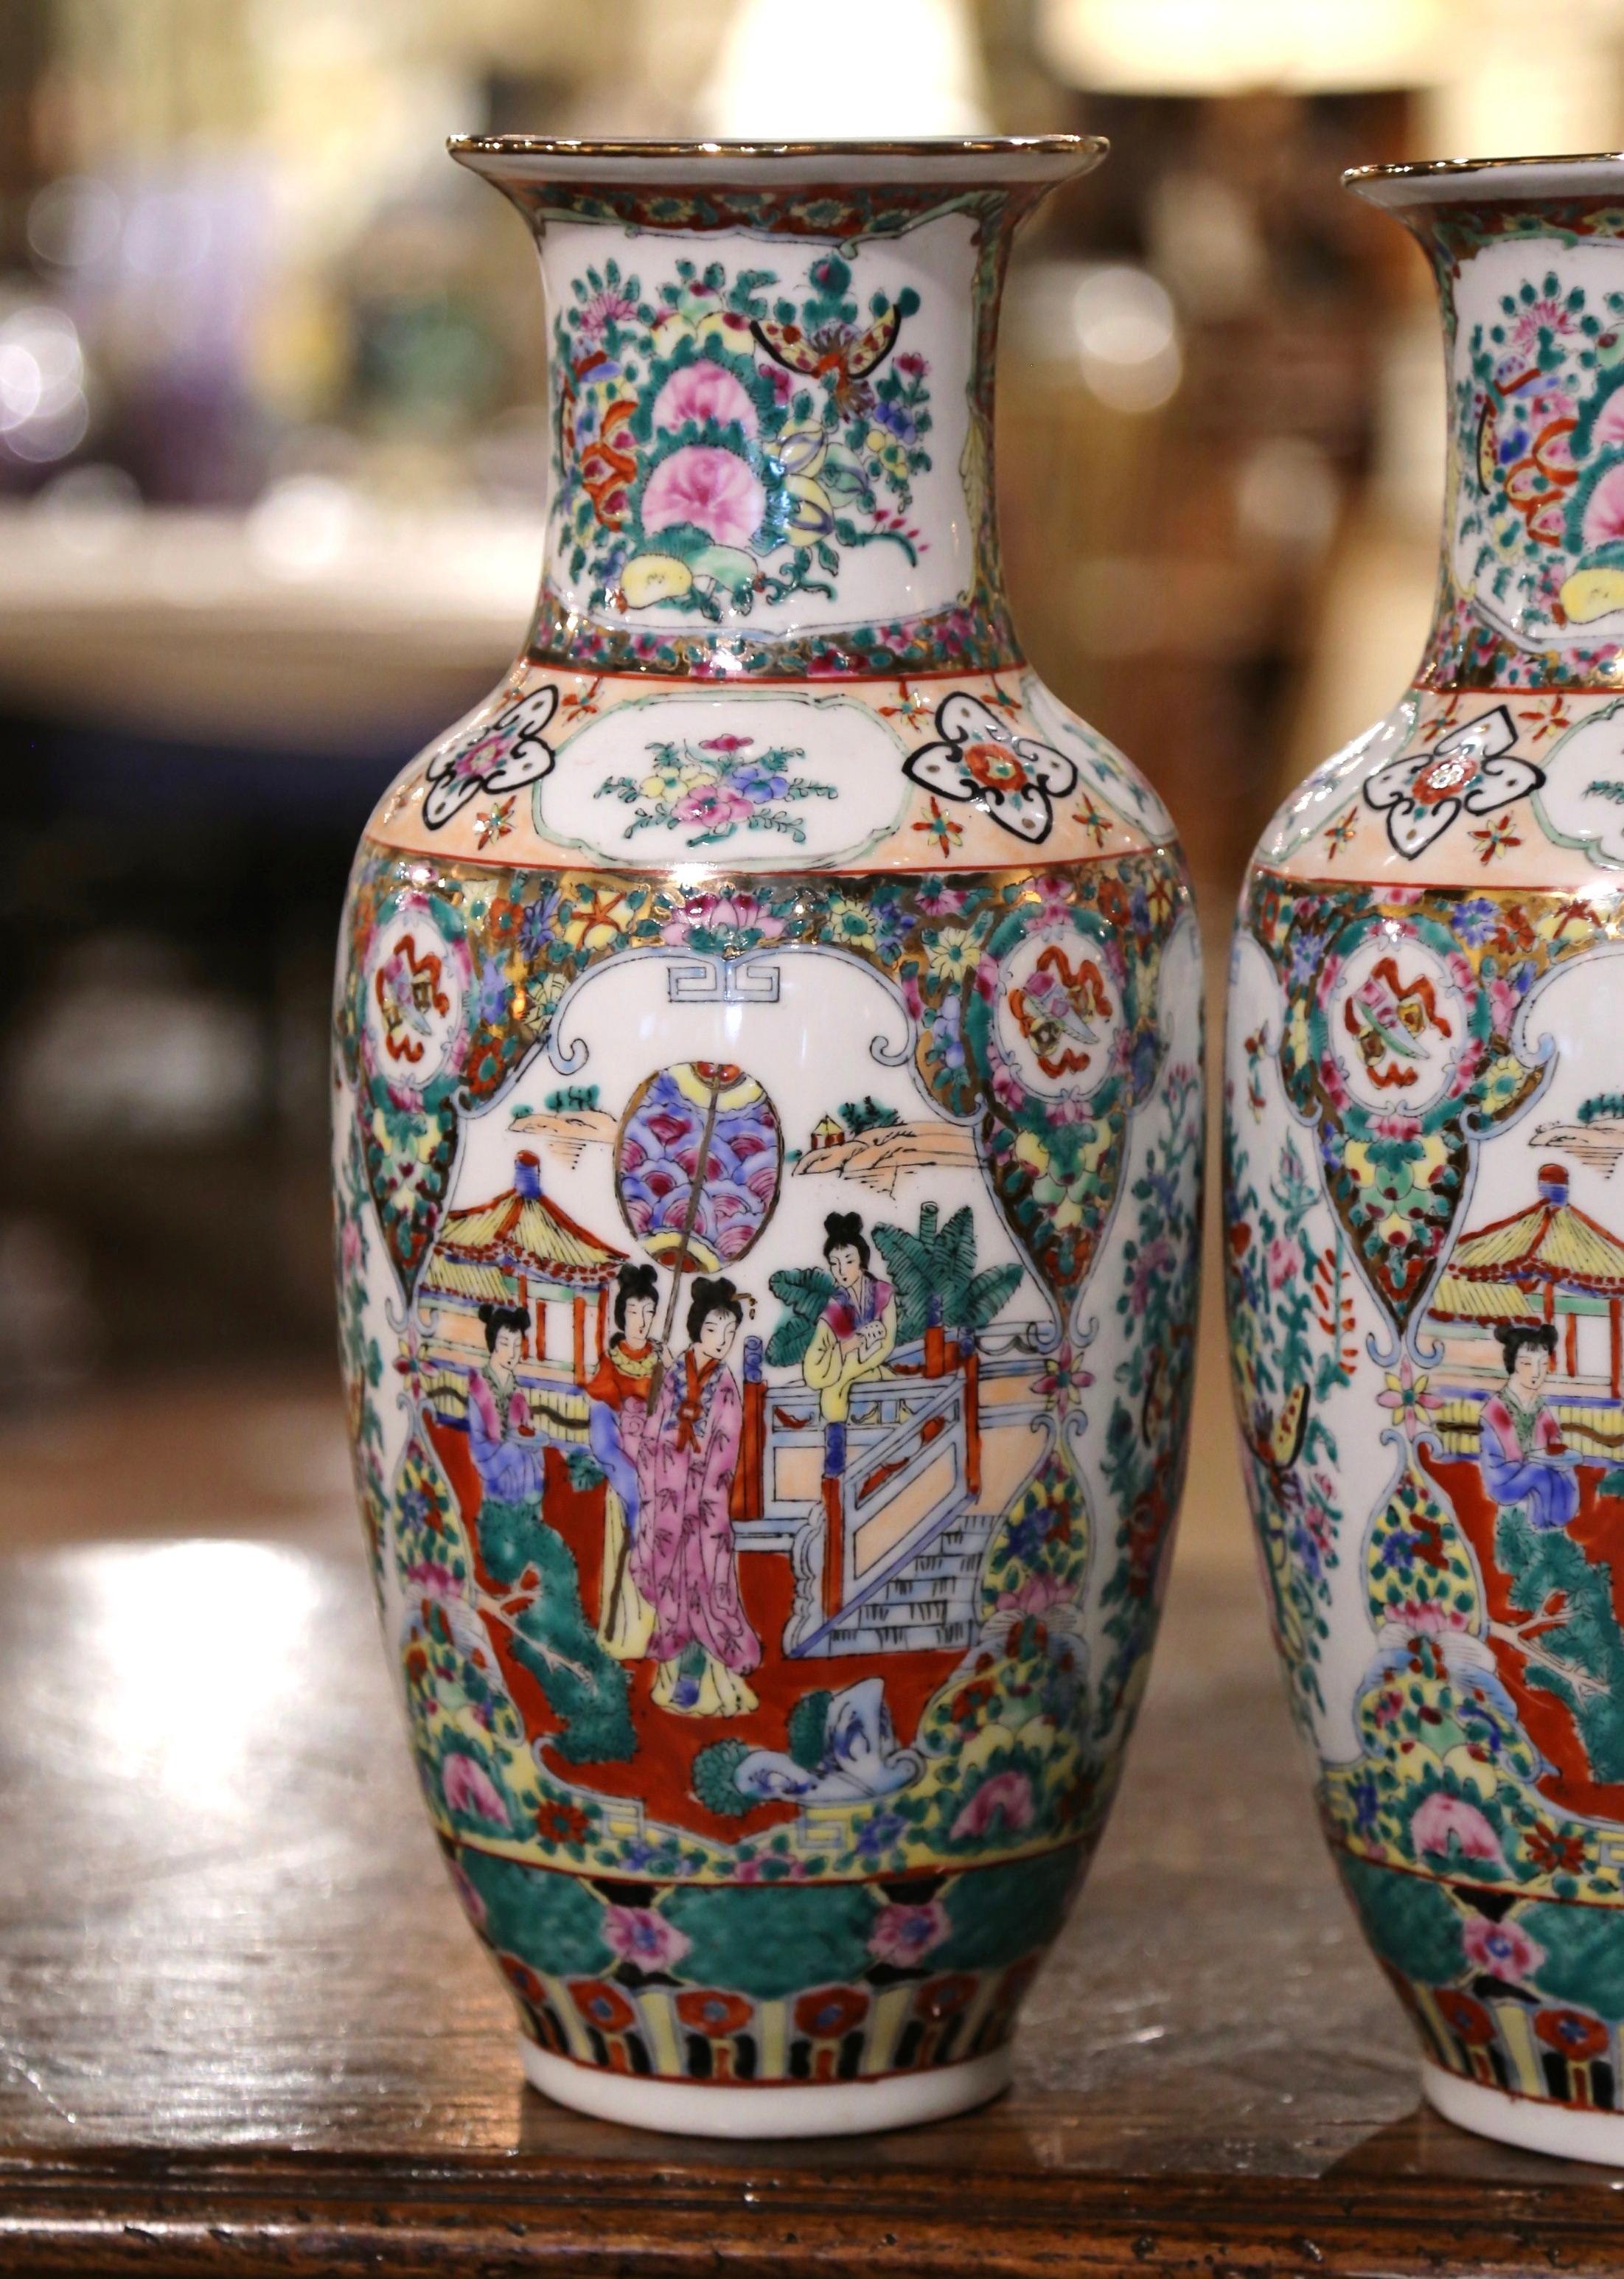 These elegant rose medallion porcelain vases were created in China circa 1960; made of porcelain and embellished with gilt accents throughout, each vase is decorated with hand painted polychrome enameled flowers, courtly figural scenes, and